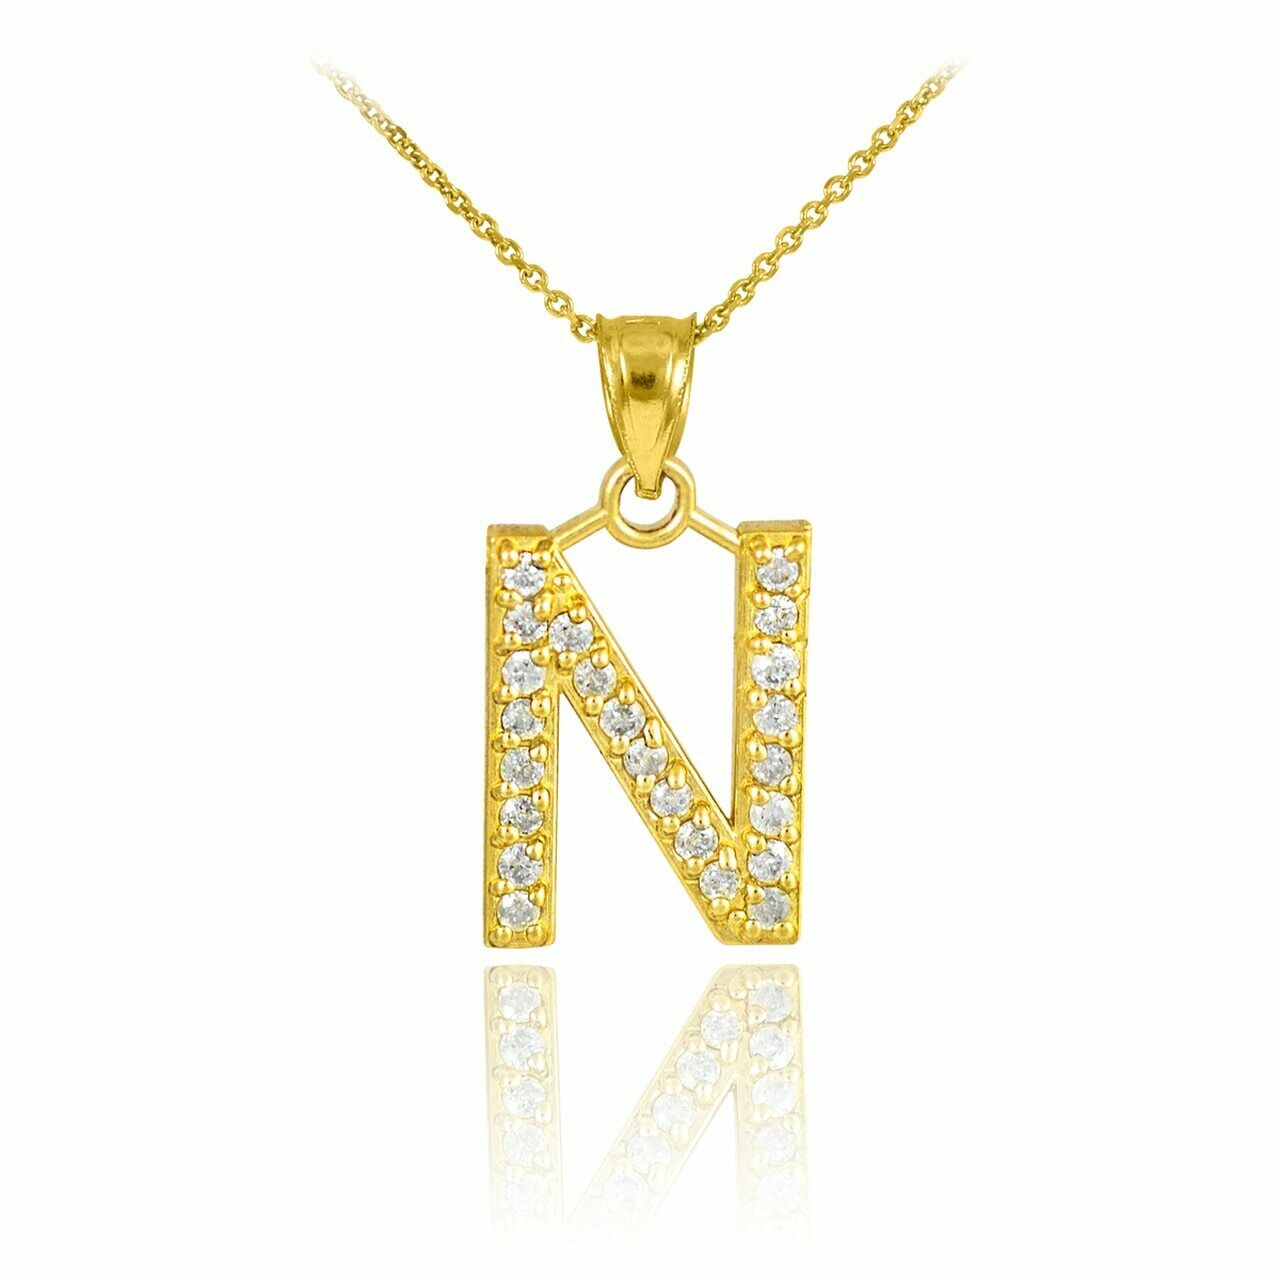 10k Solid Yellow Gold Diamond Monogram Initial Letter N Pendant Necklace